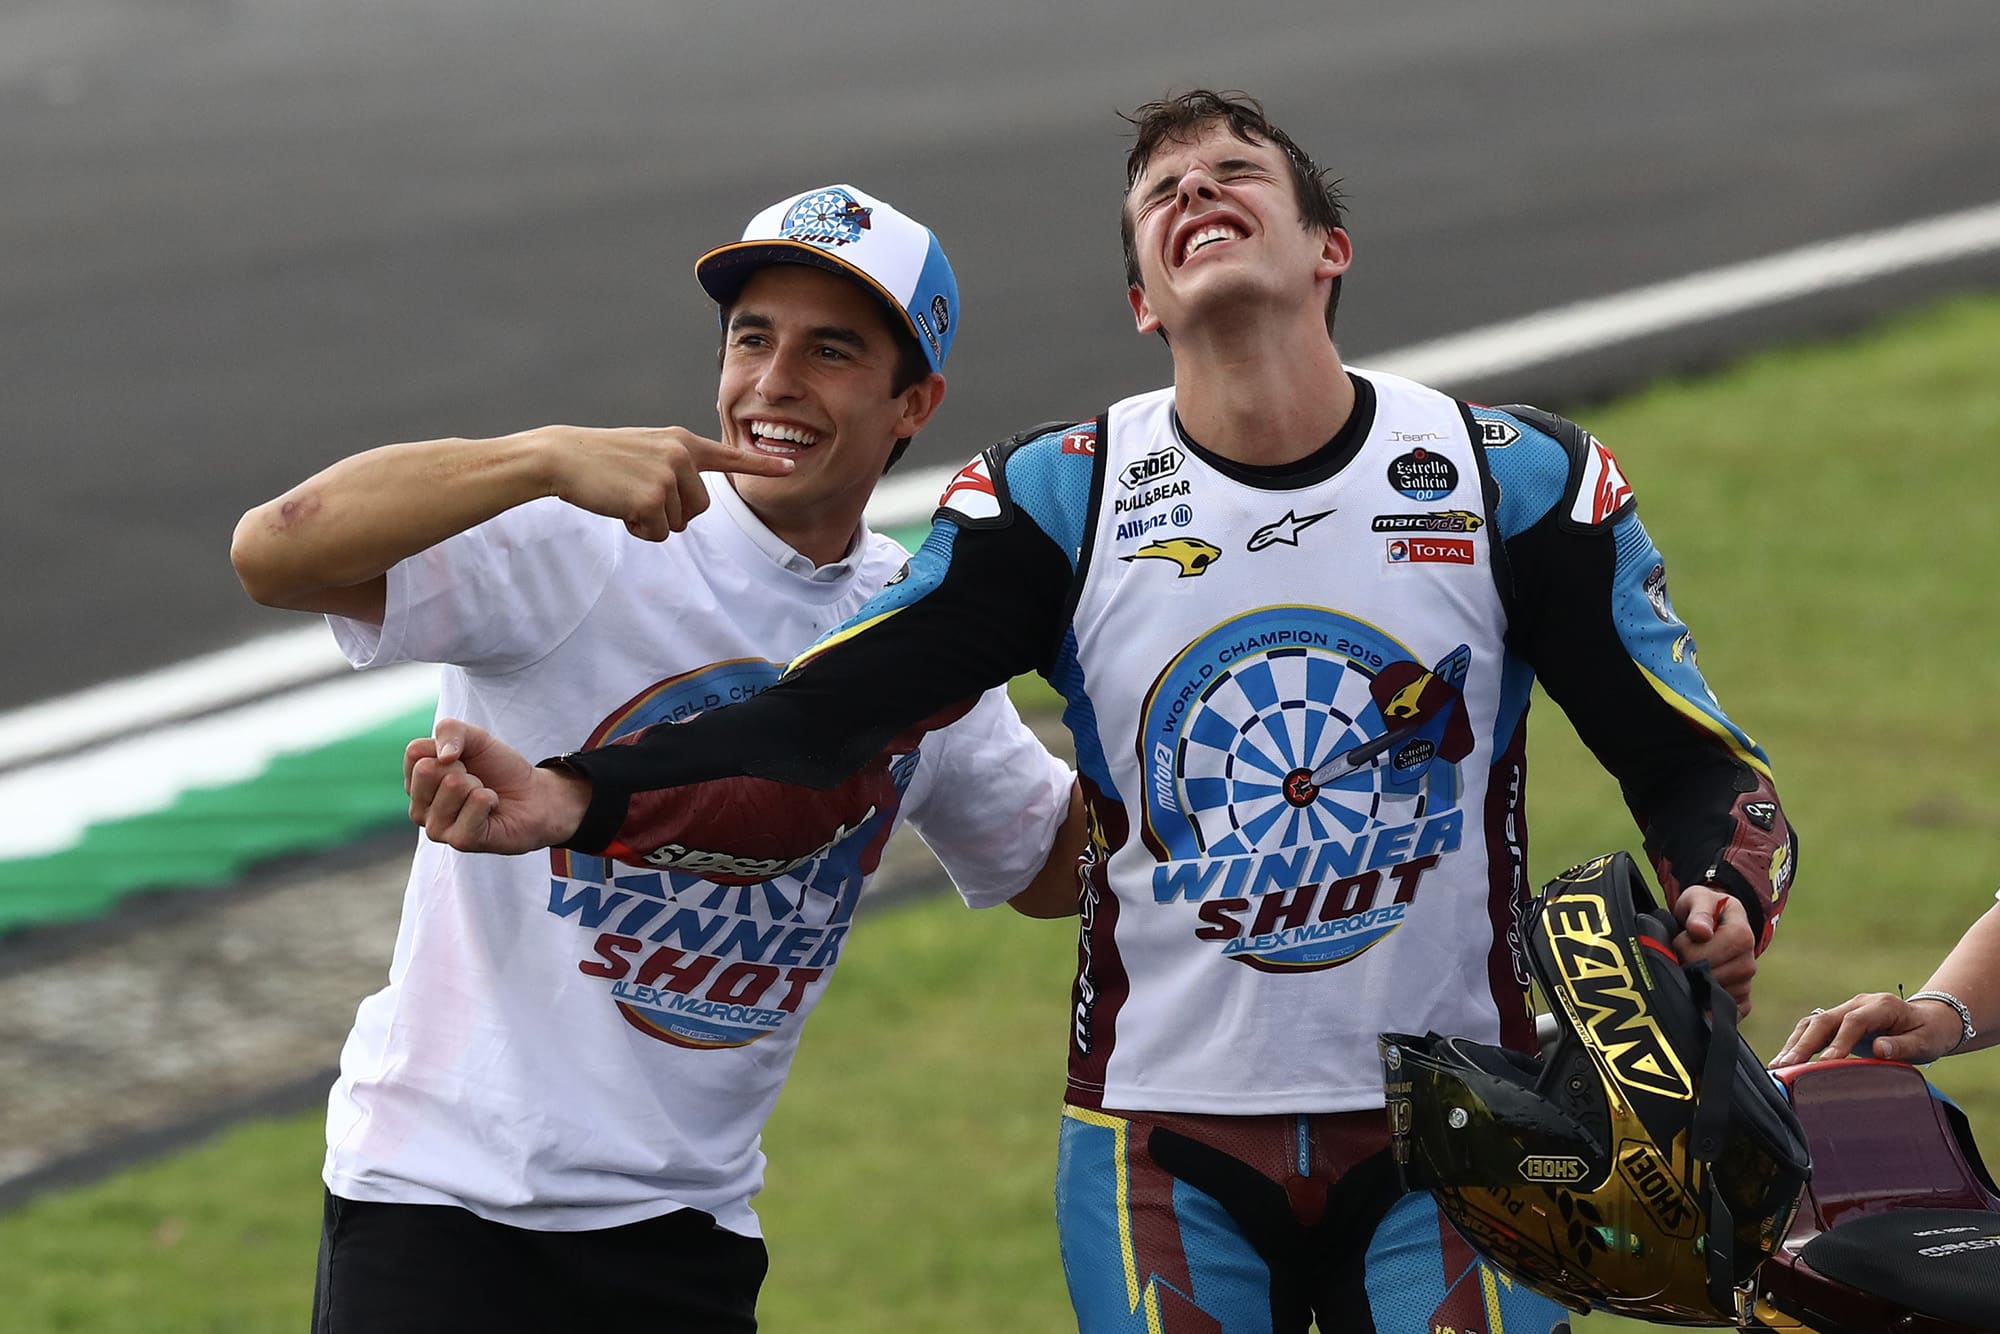 Alex Marquez celebrates winning his Moto2 title with brother Marc